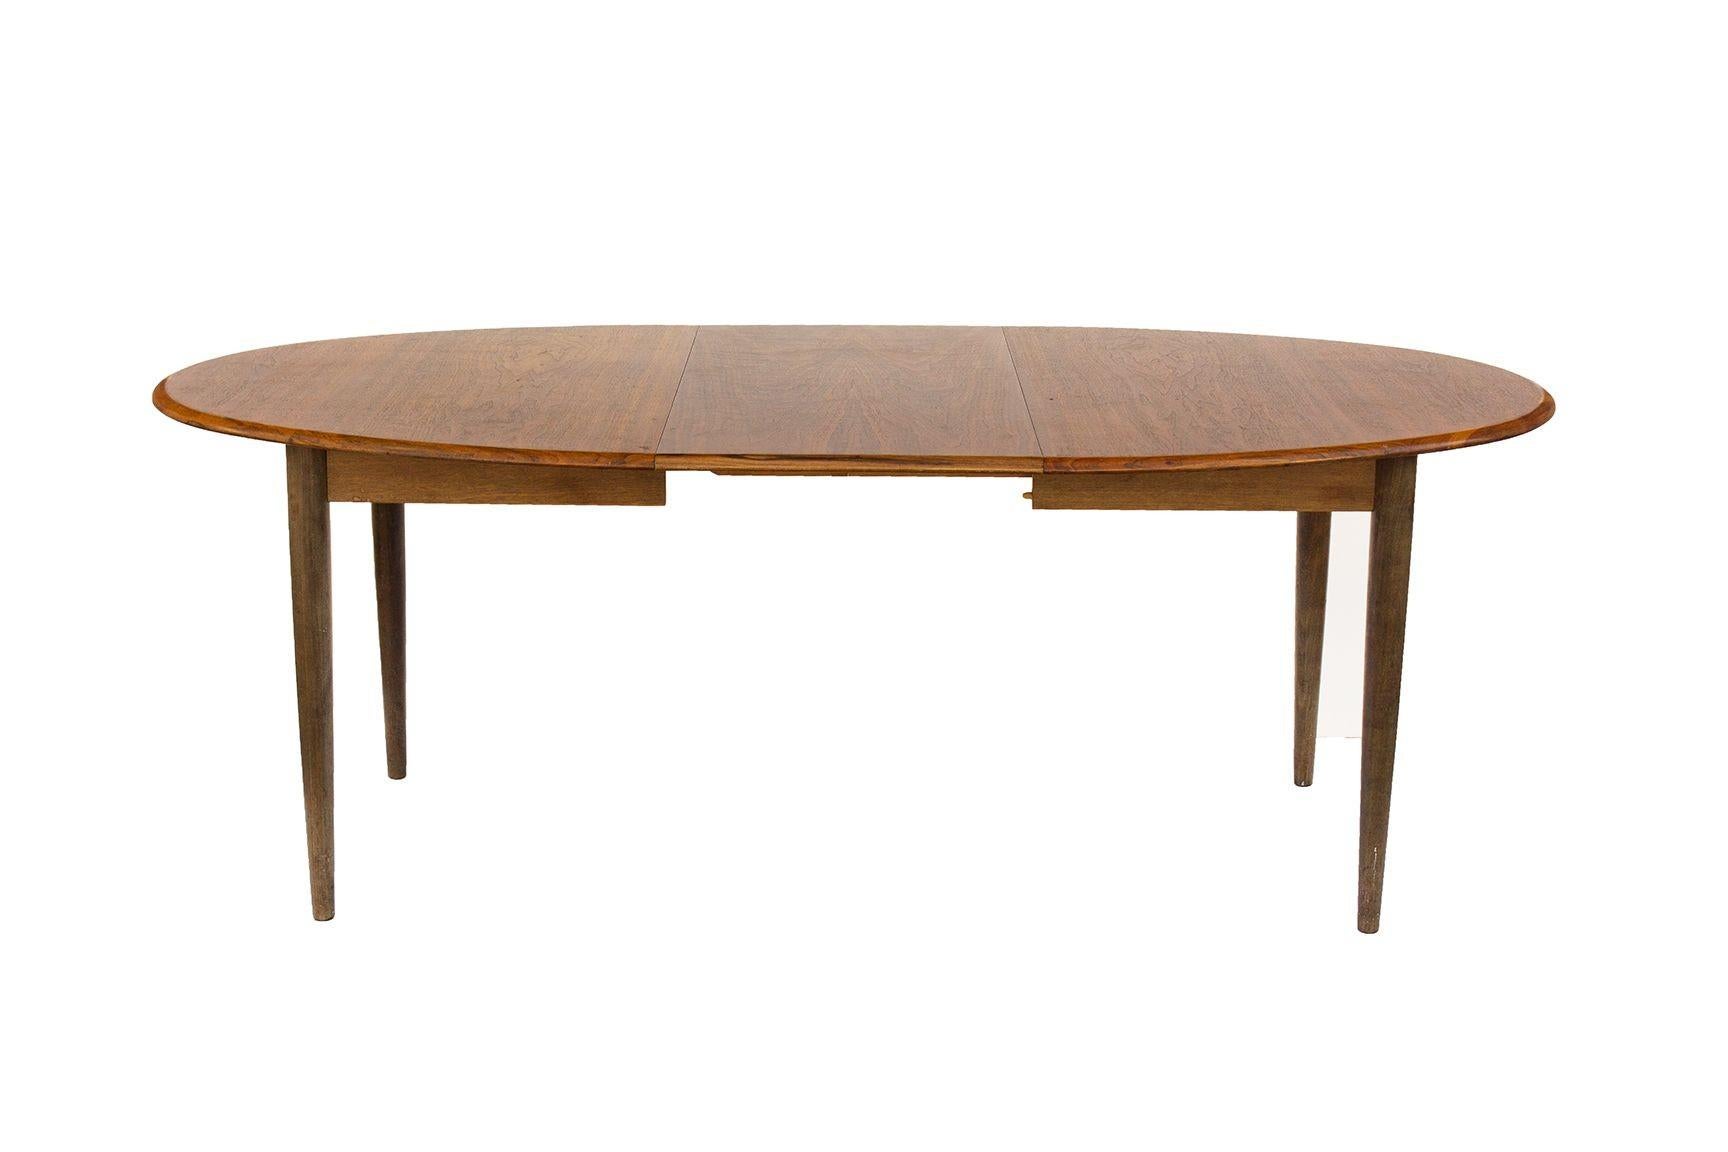 Oval Danish Teak Dining Table with 2 Leaves by Gudme Mobelfabrik 1